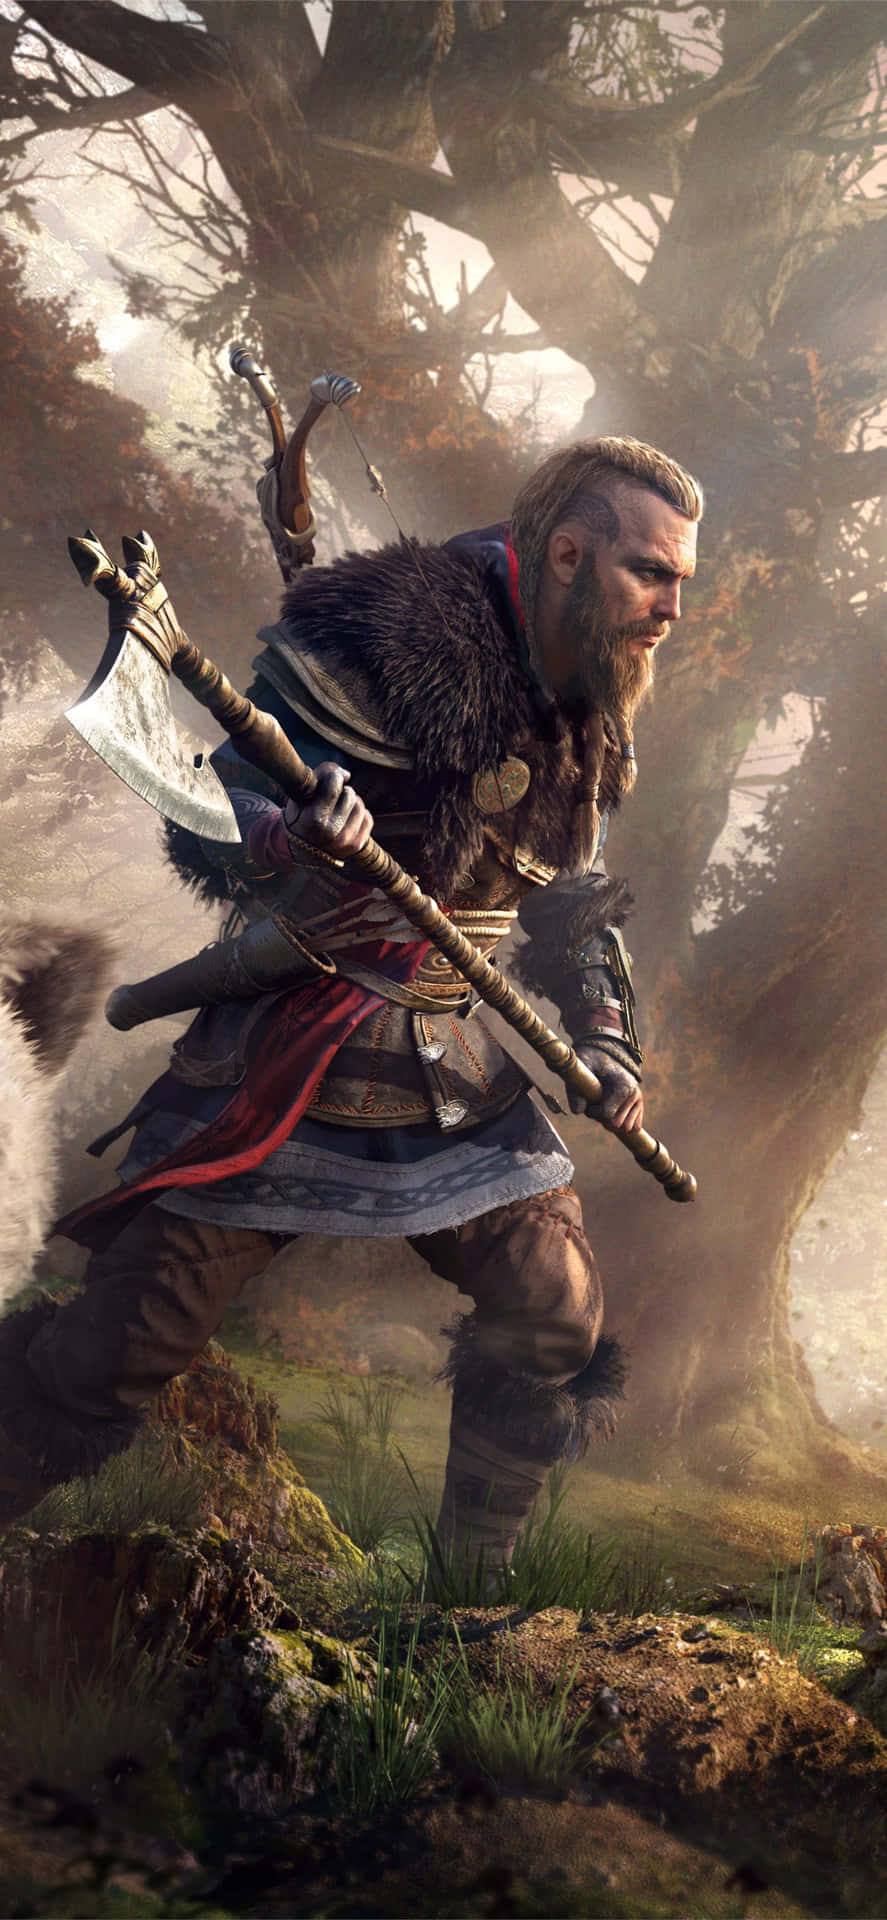 Eivor Bearded axe Iphone Xs Max Assassin's Creed Valhalla Background